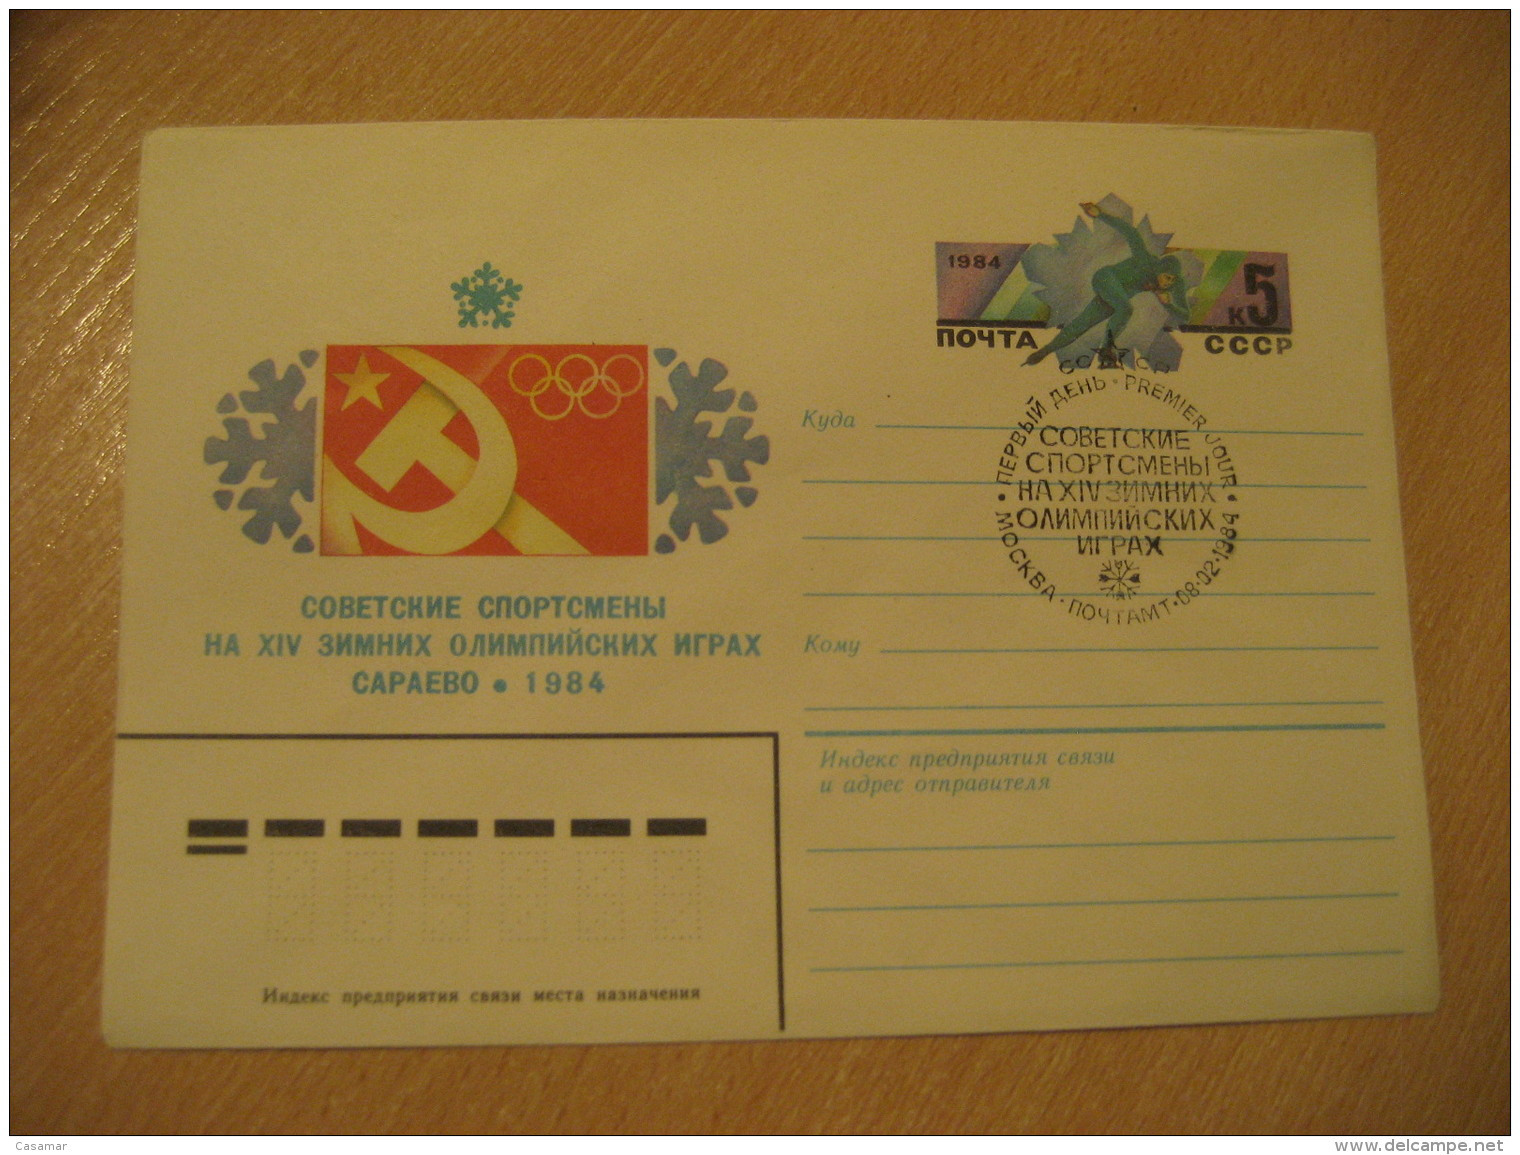 RUSSIA 1984 Olympic Games Olympics Speed Skating On Ice Patinage De Vitesse Sur Glace Postal Stationery Cover USSR CCCP - Patinaje Artístico